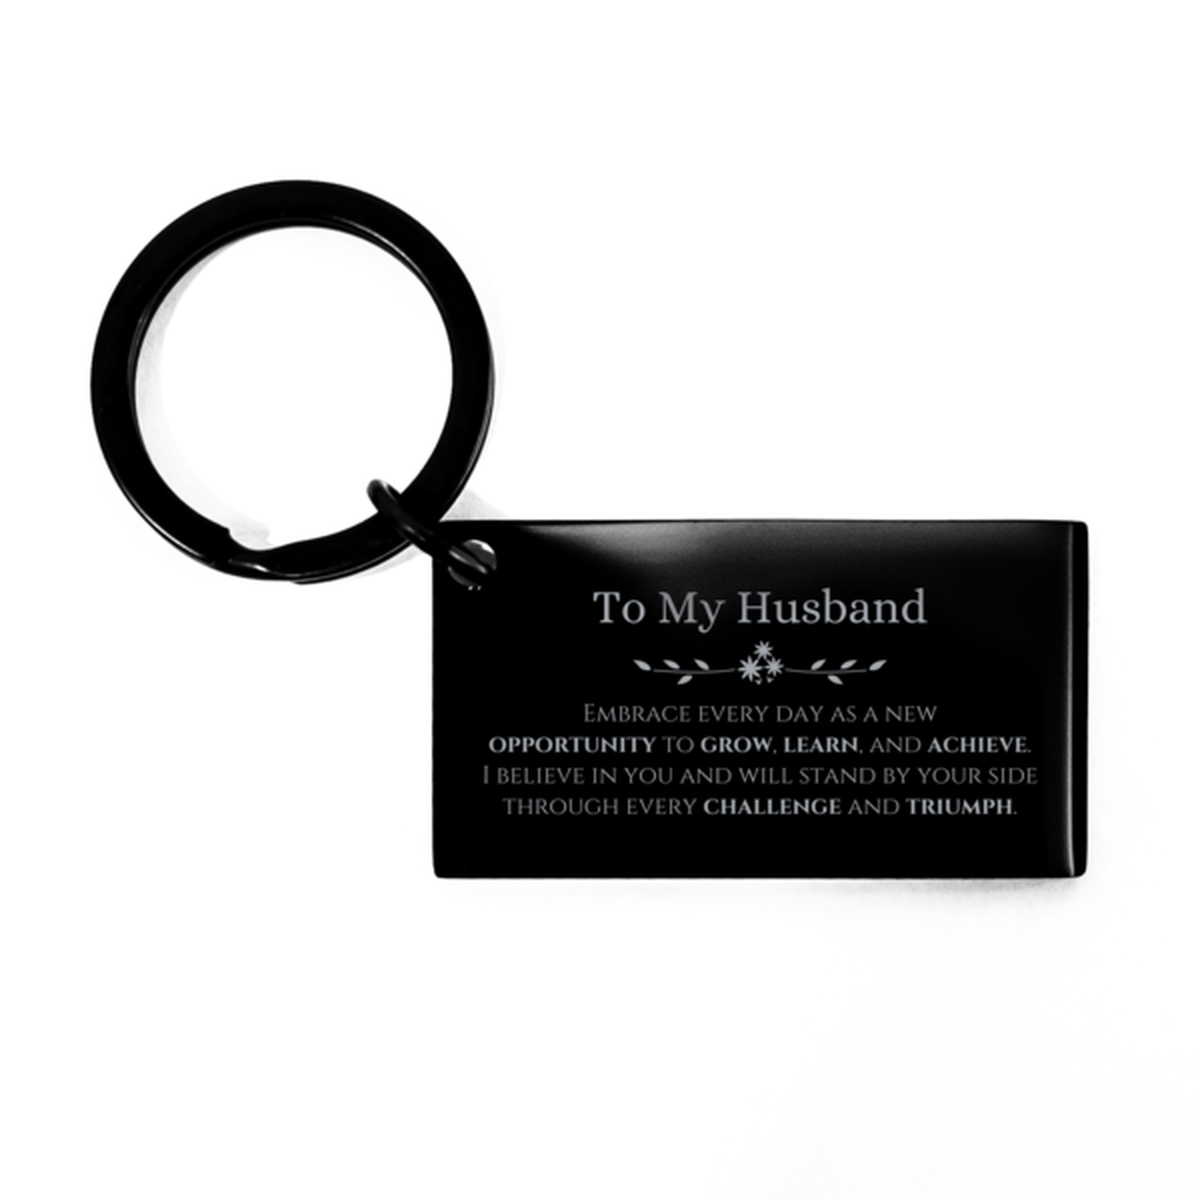 To My Husband Gifts, I believe in you and will stand by your side, Inspirational Keychain For Husband, Birthday Christmas Motivational Husband Gifts